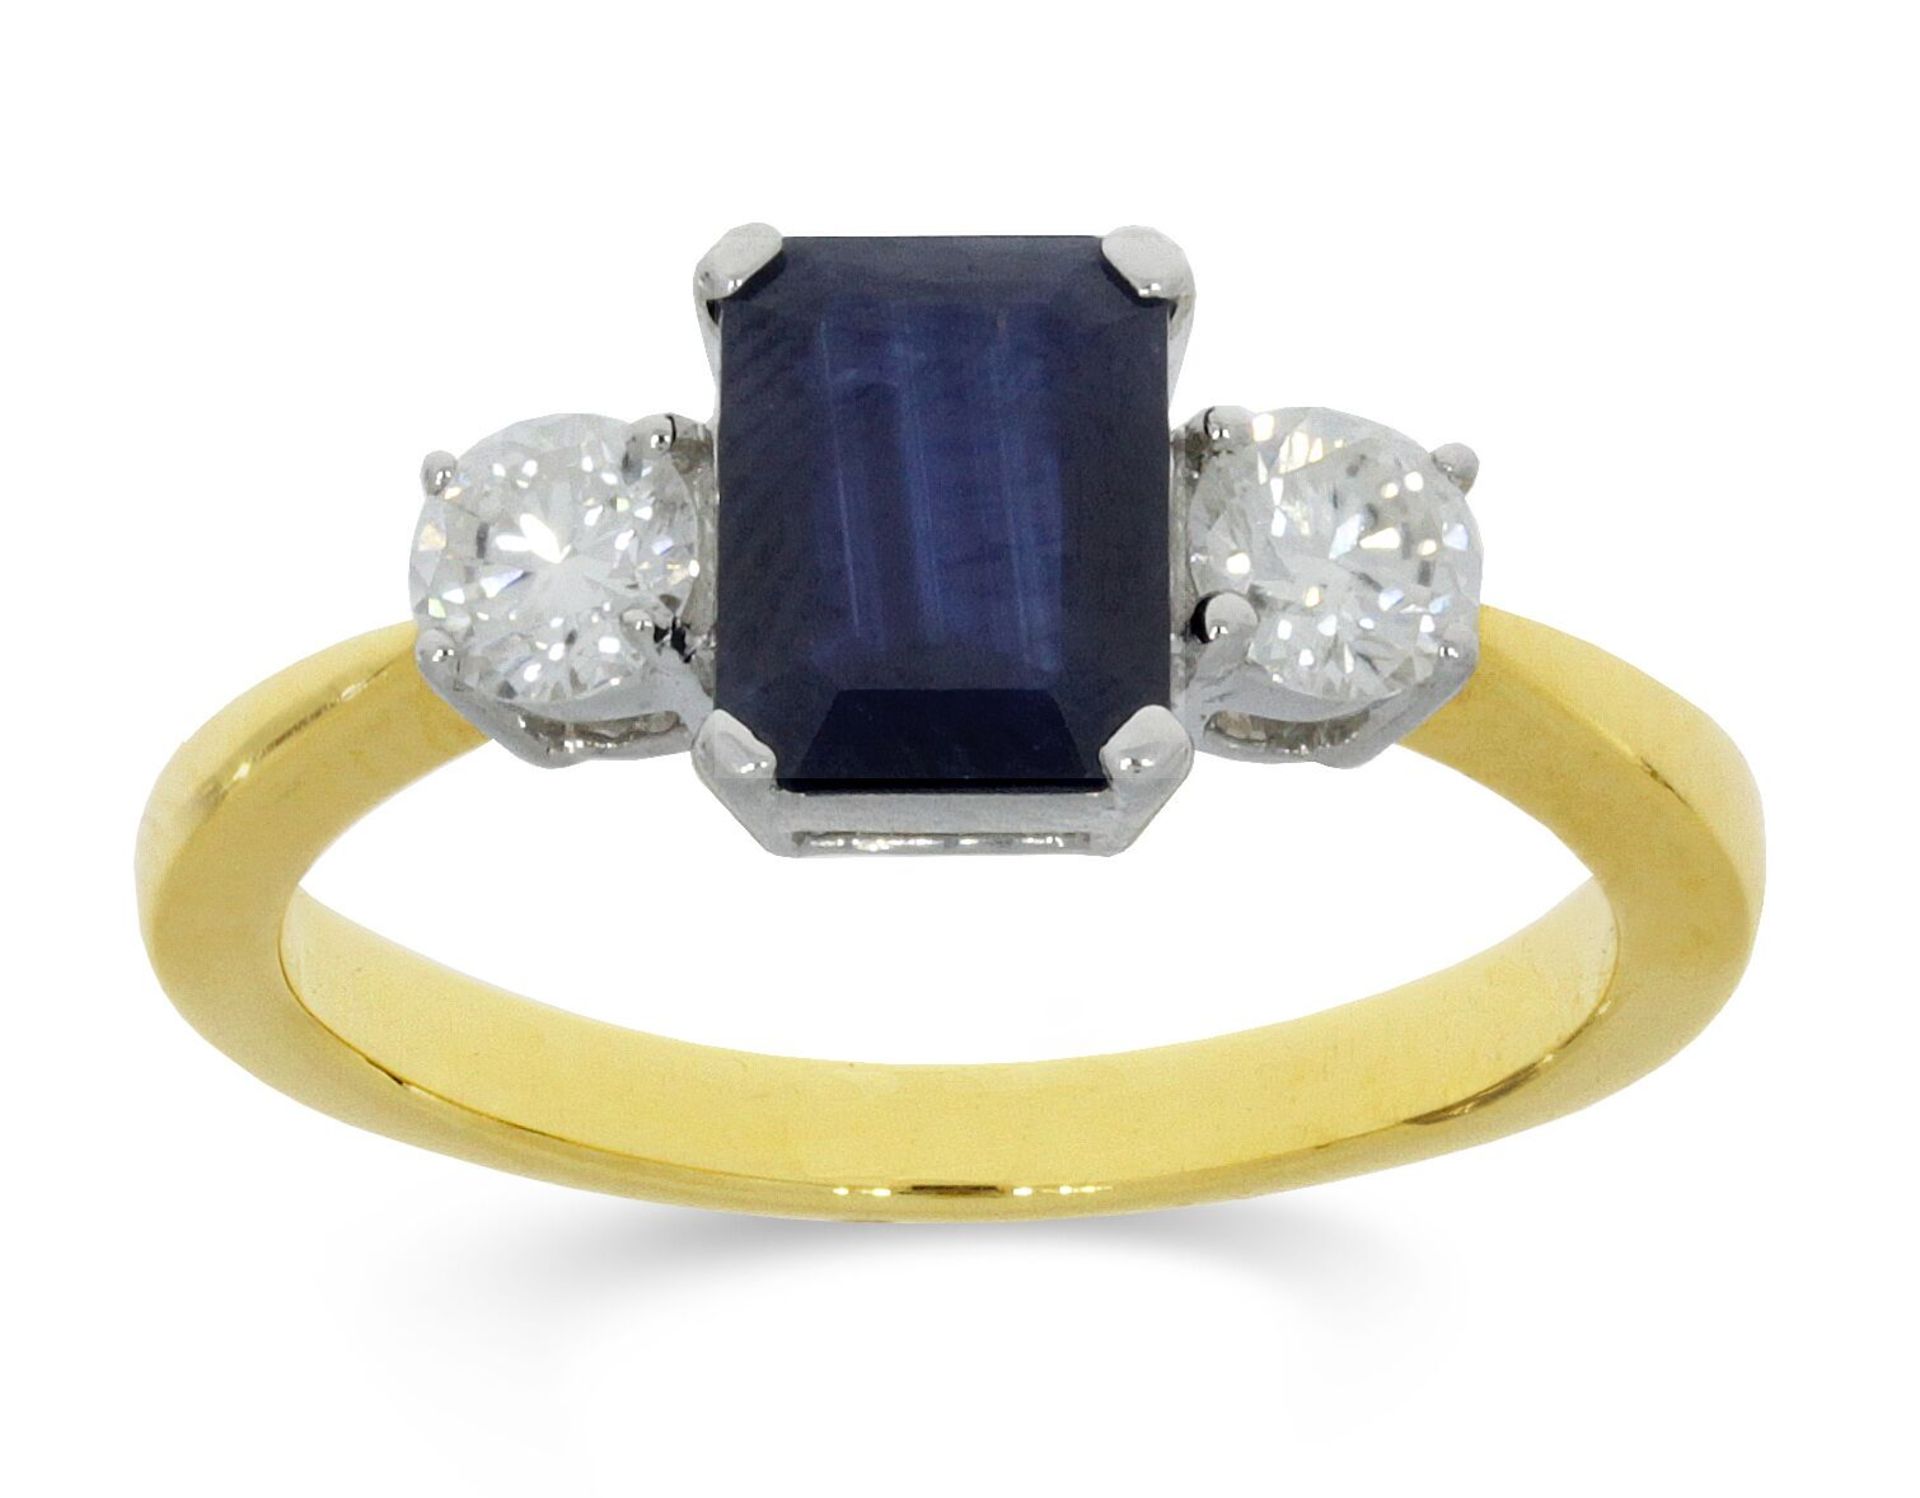 1.4 Carat Sapphire and 0.50ct Diamond Ring in Yell